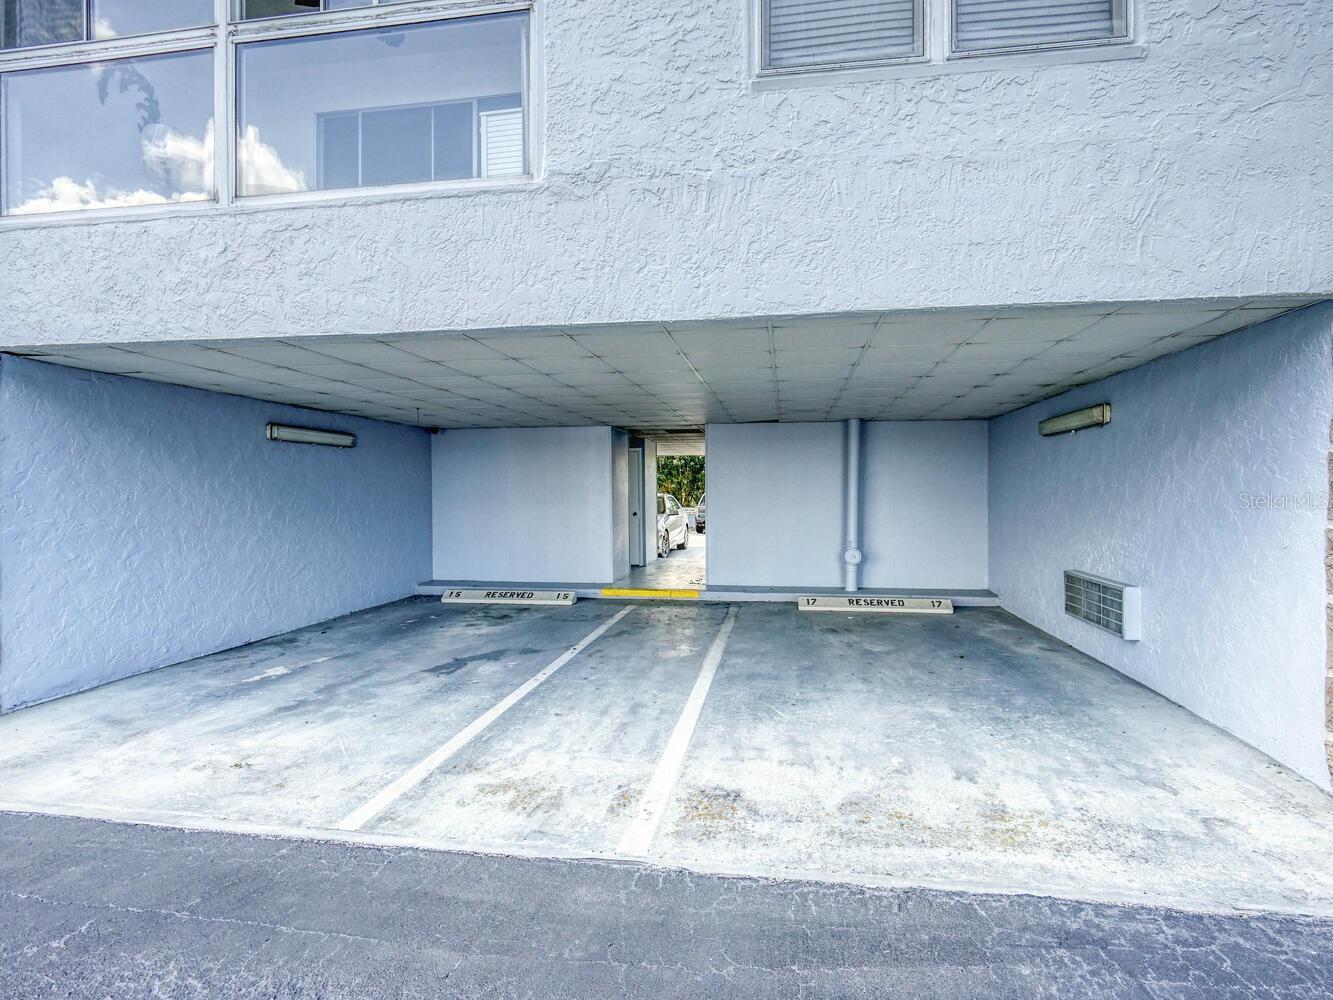 Under Building Parking Space Available for Additional $18,000